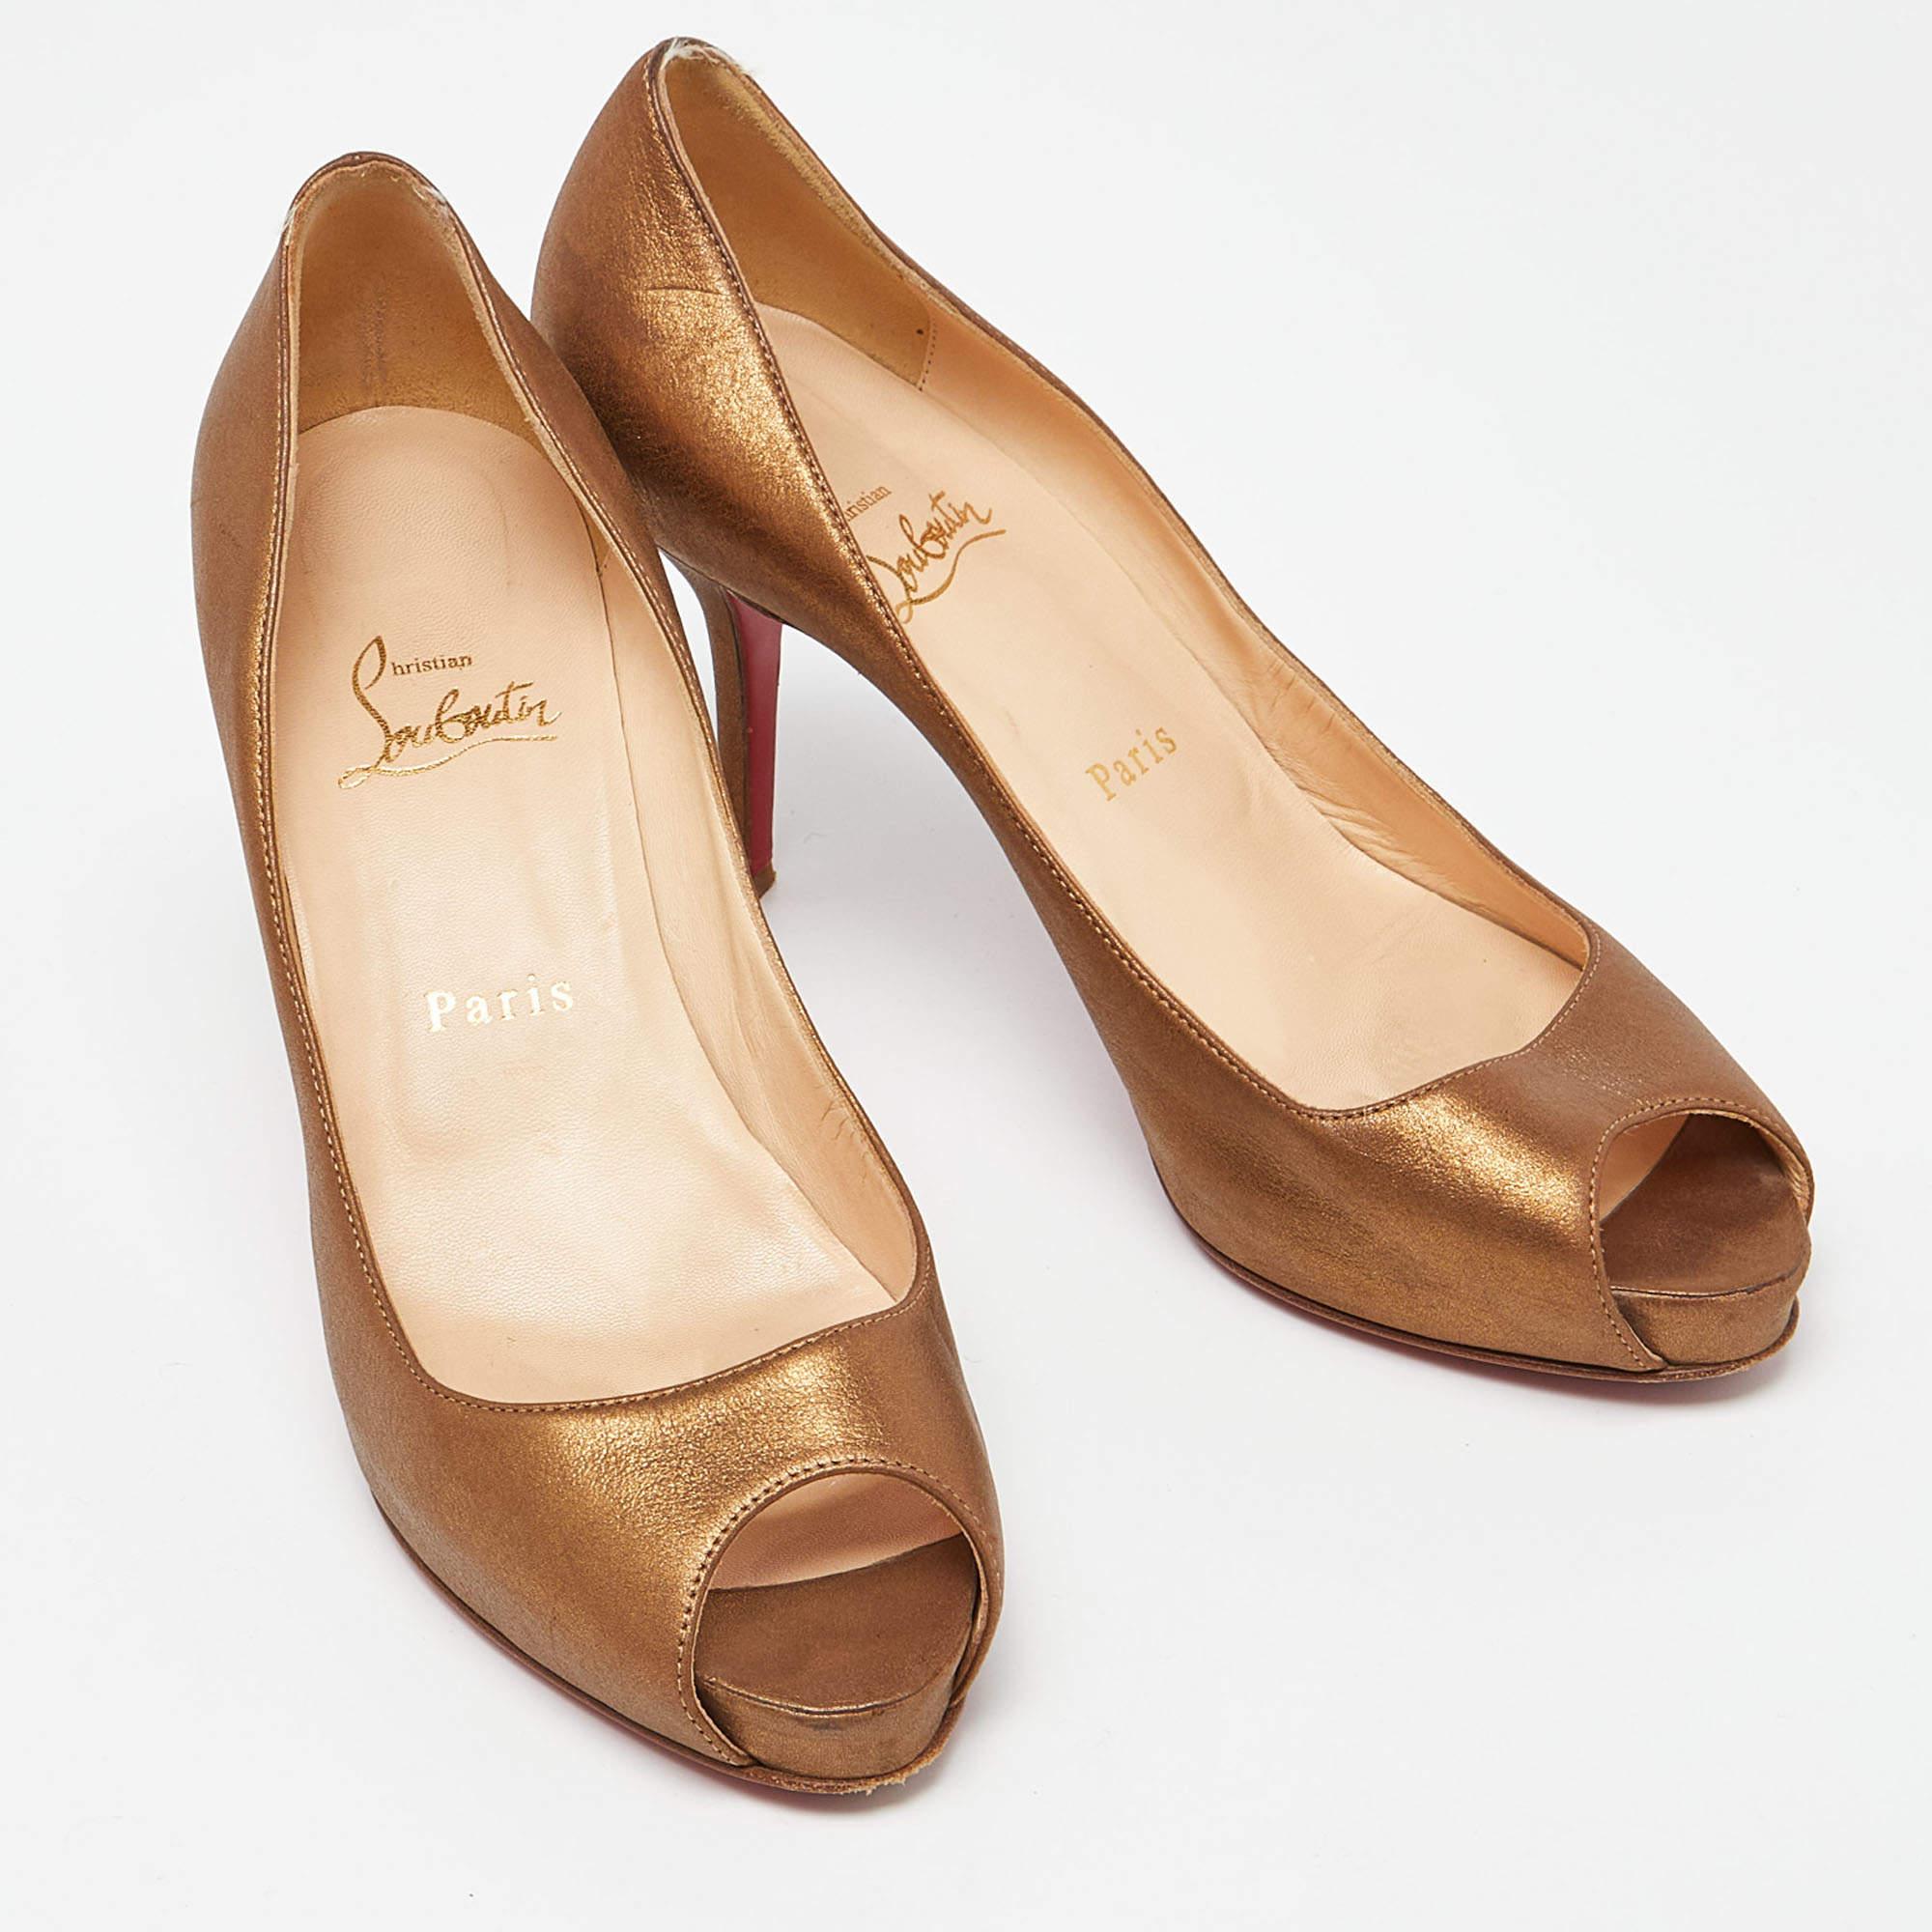 Christian Louboutin Metallic Brown Leather Very Prive Pumps Size 38 For Sale 1